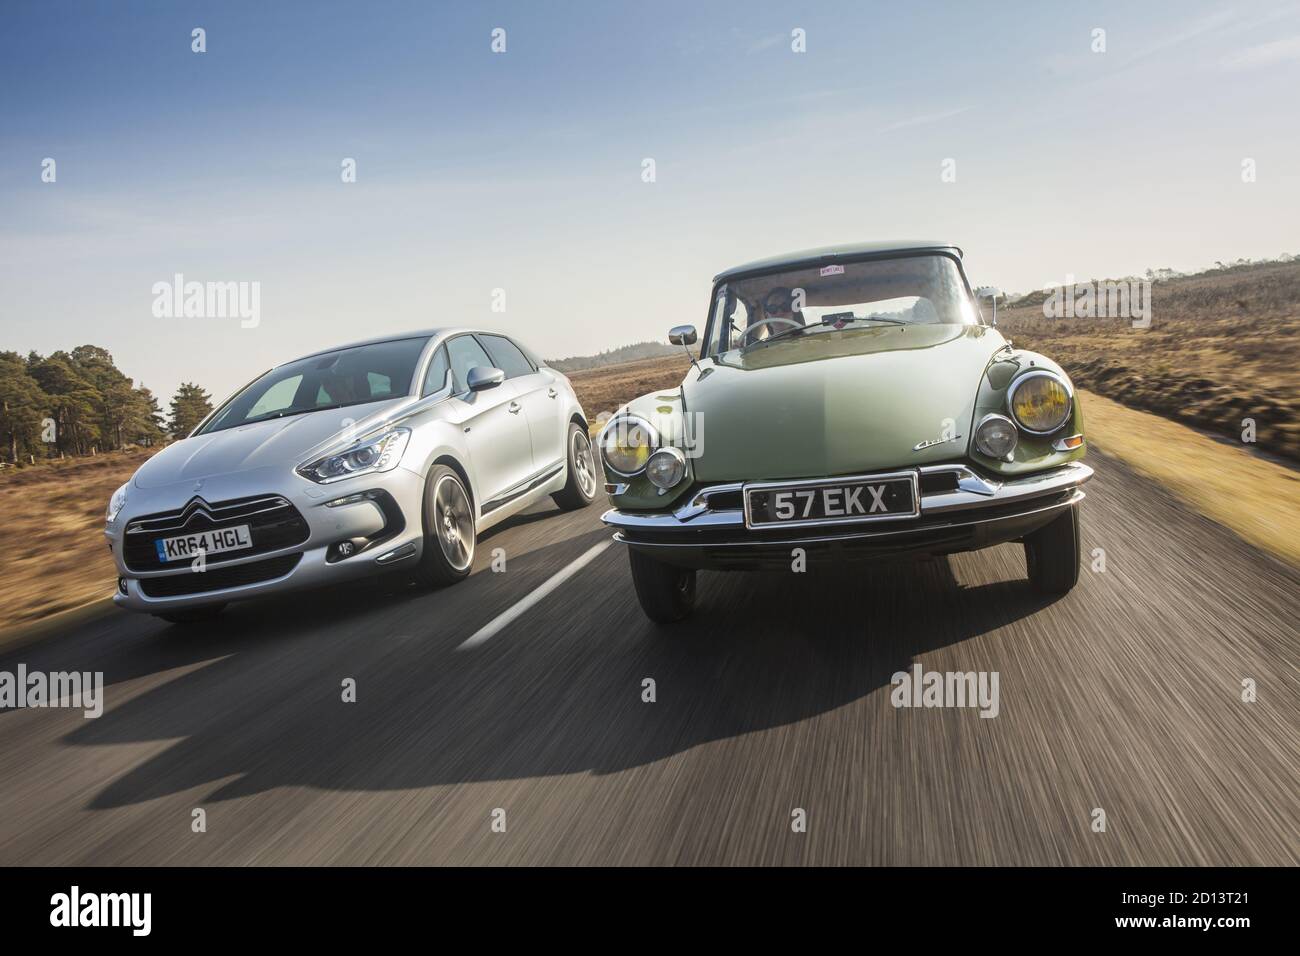 Citroen DS19 and Citroen DS5 , New Forest, UK, March 2015 Stock Photo